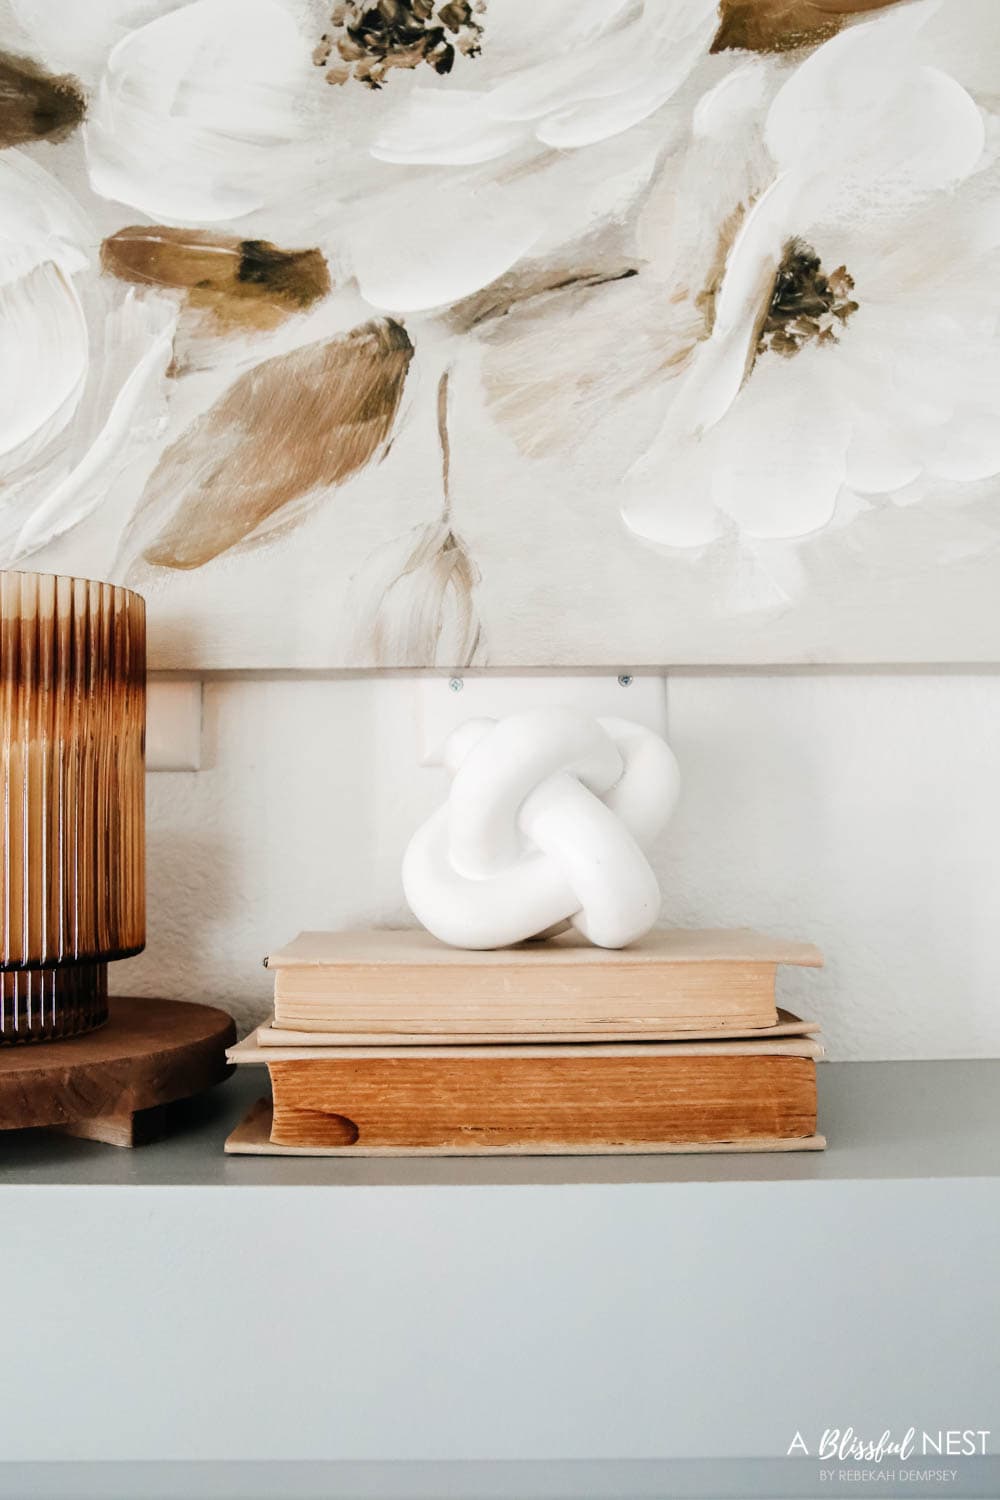 Decorative white ceramic knot sitting on top of vintage books.